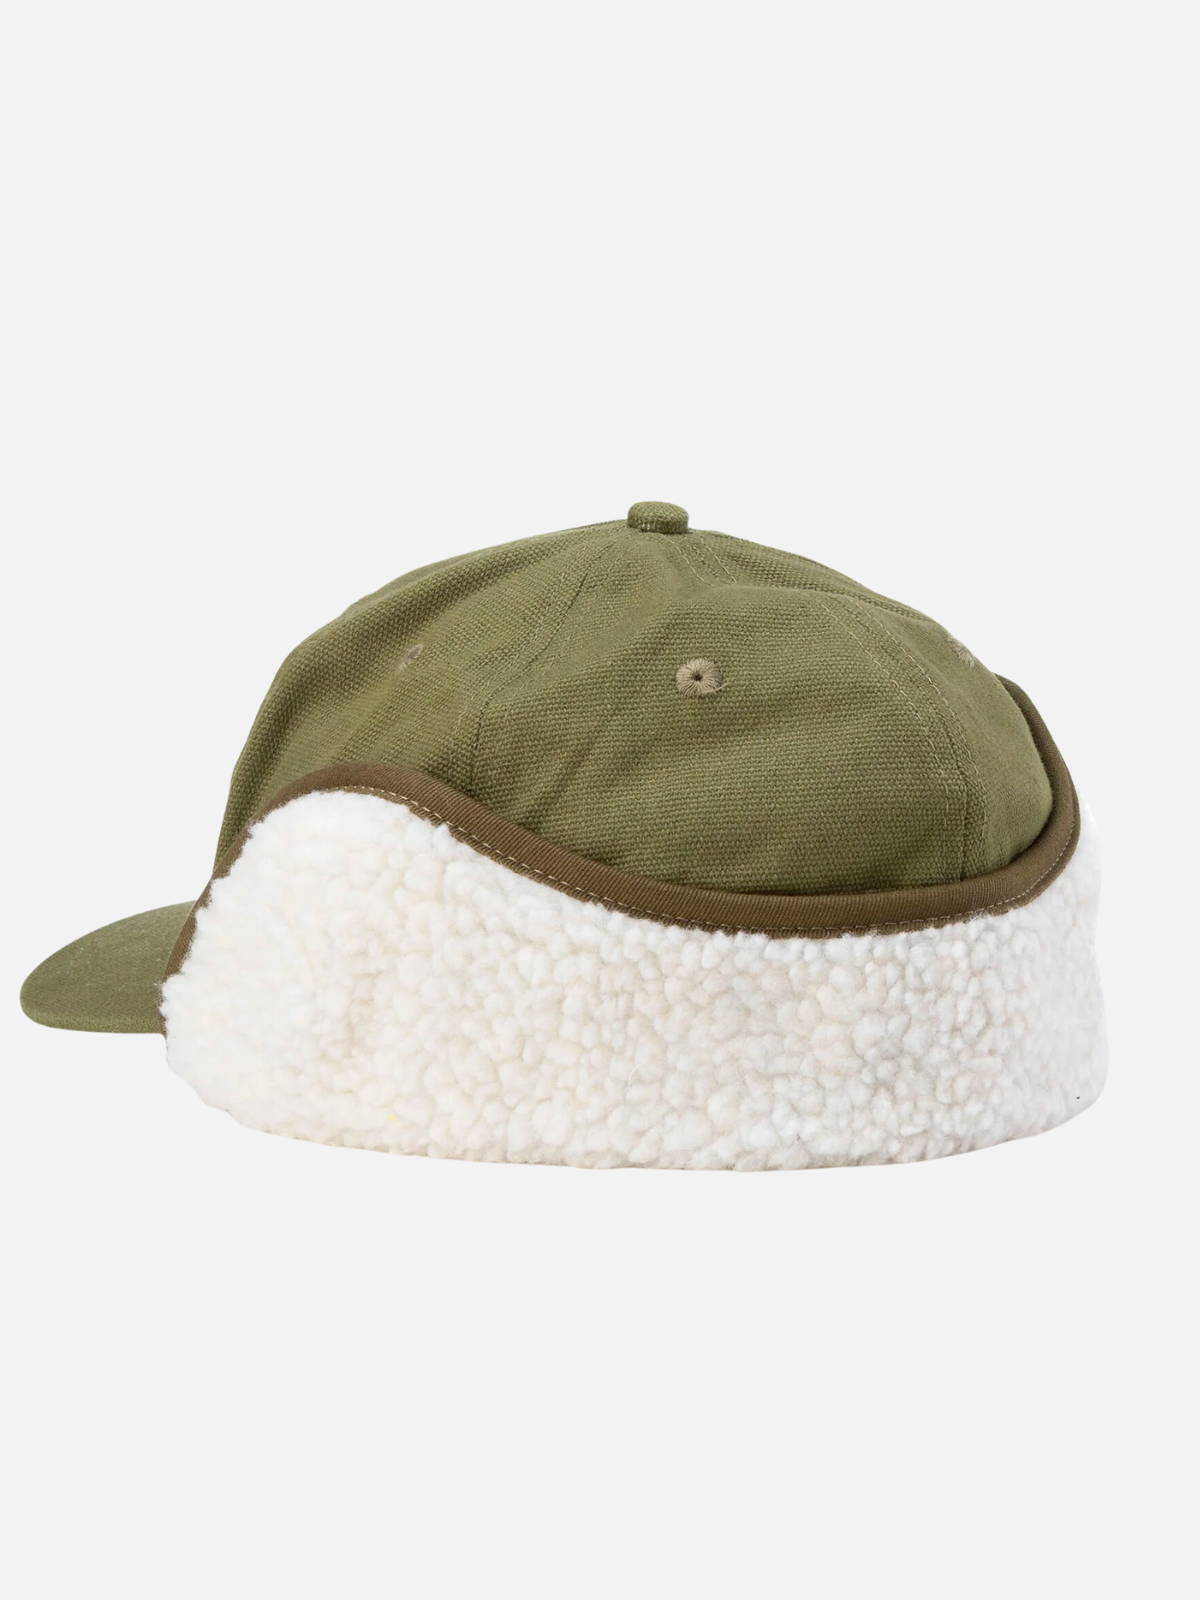 seager wilson cotton canvas flapjack winter sherpa hat olive green white orange brand patch kempt athens ga georgia men's clothing store